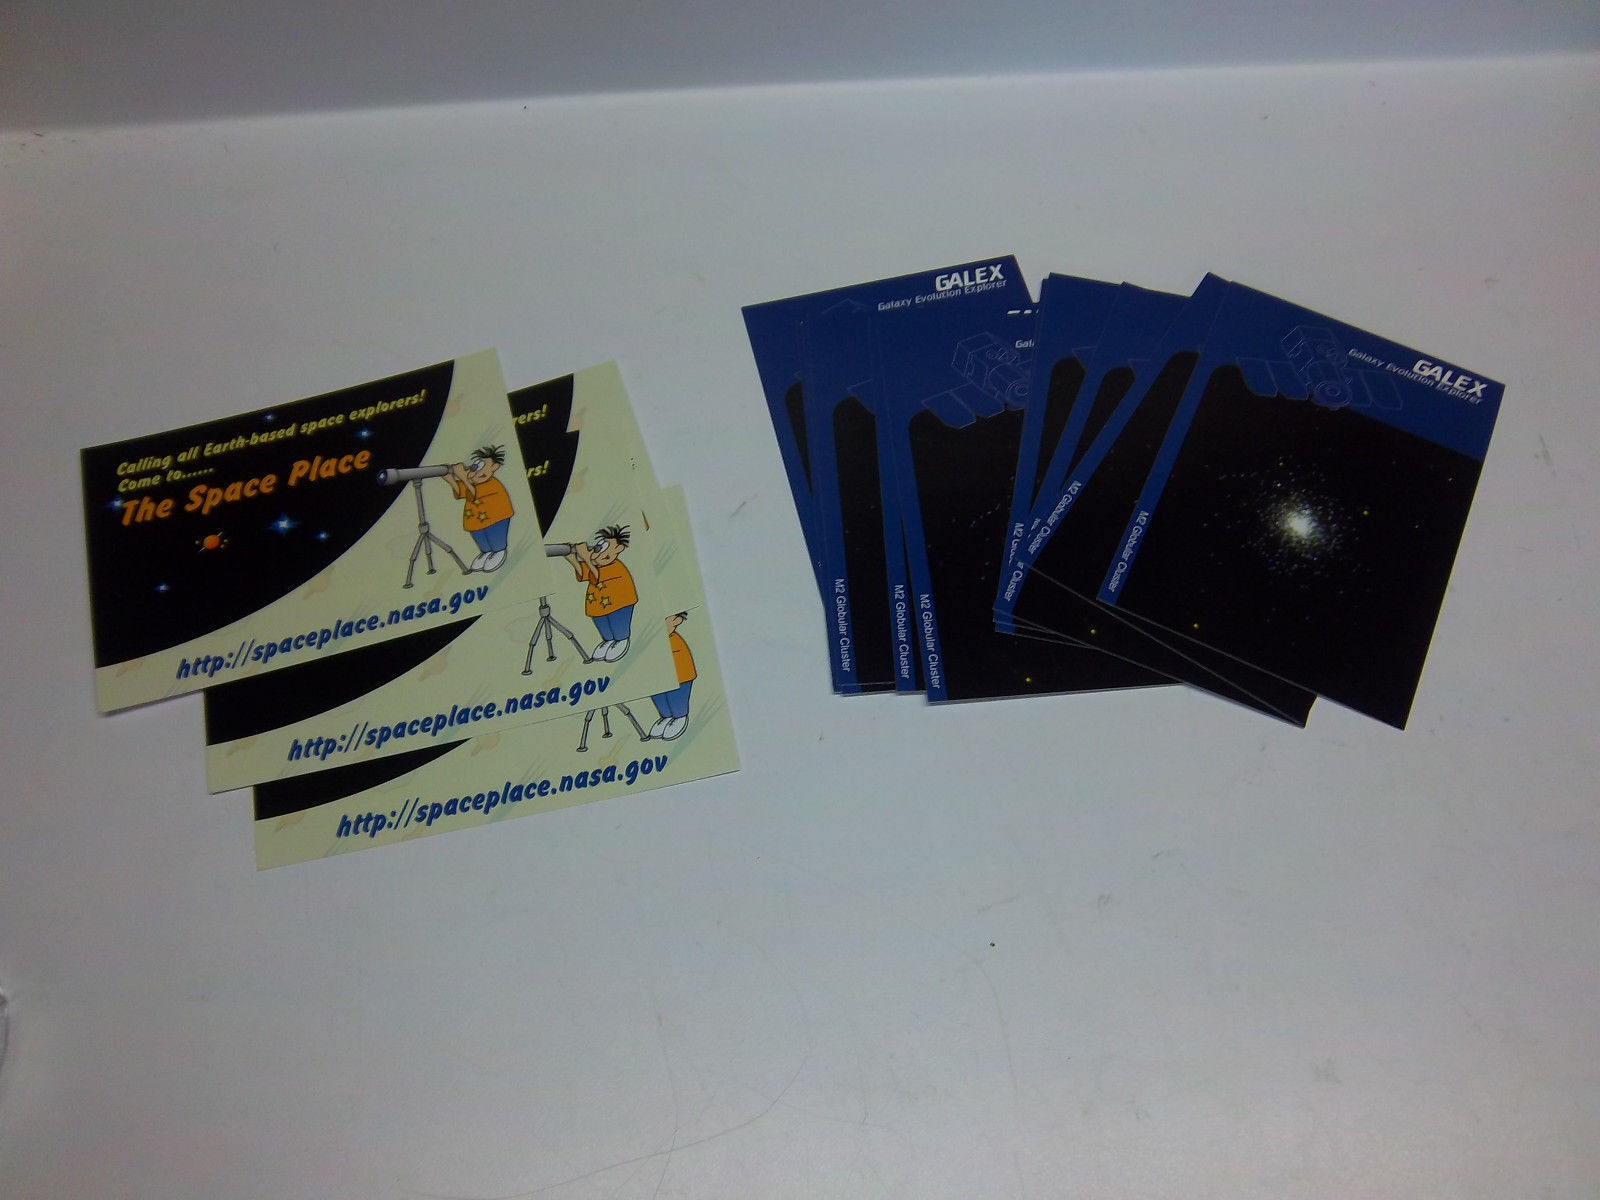 15 Unused Postcards from NASA Jet Propulsion Lab, The Space Place & Galex